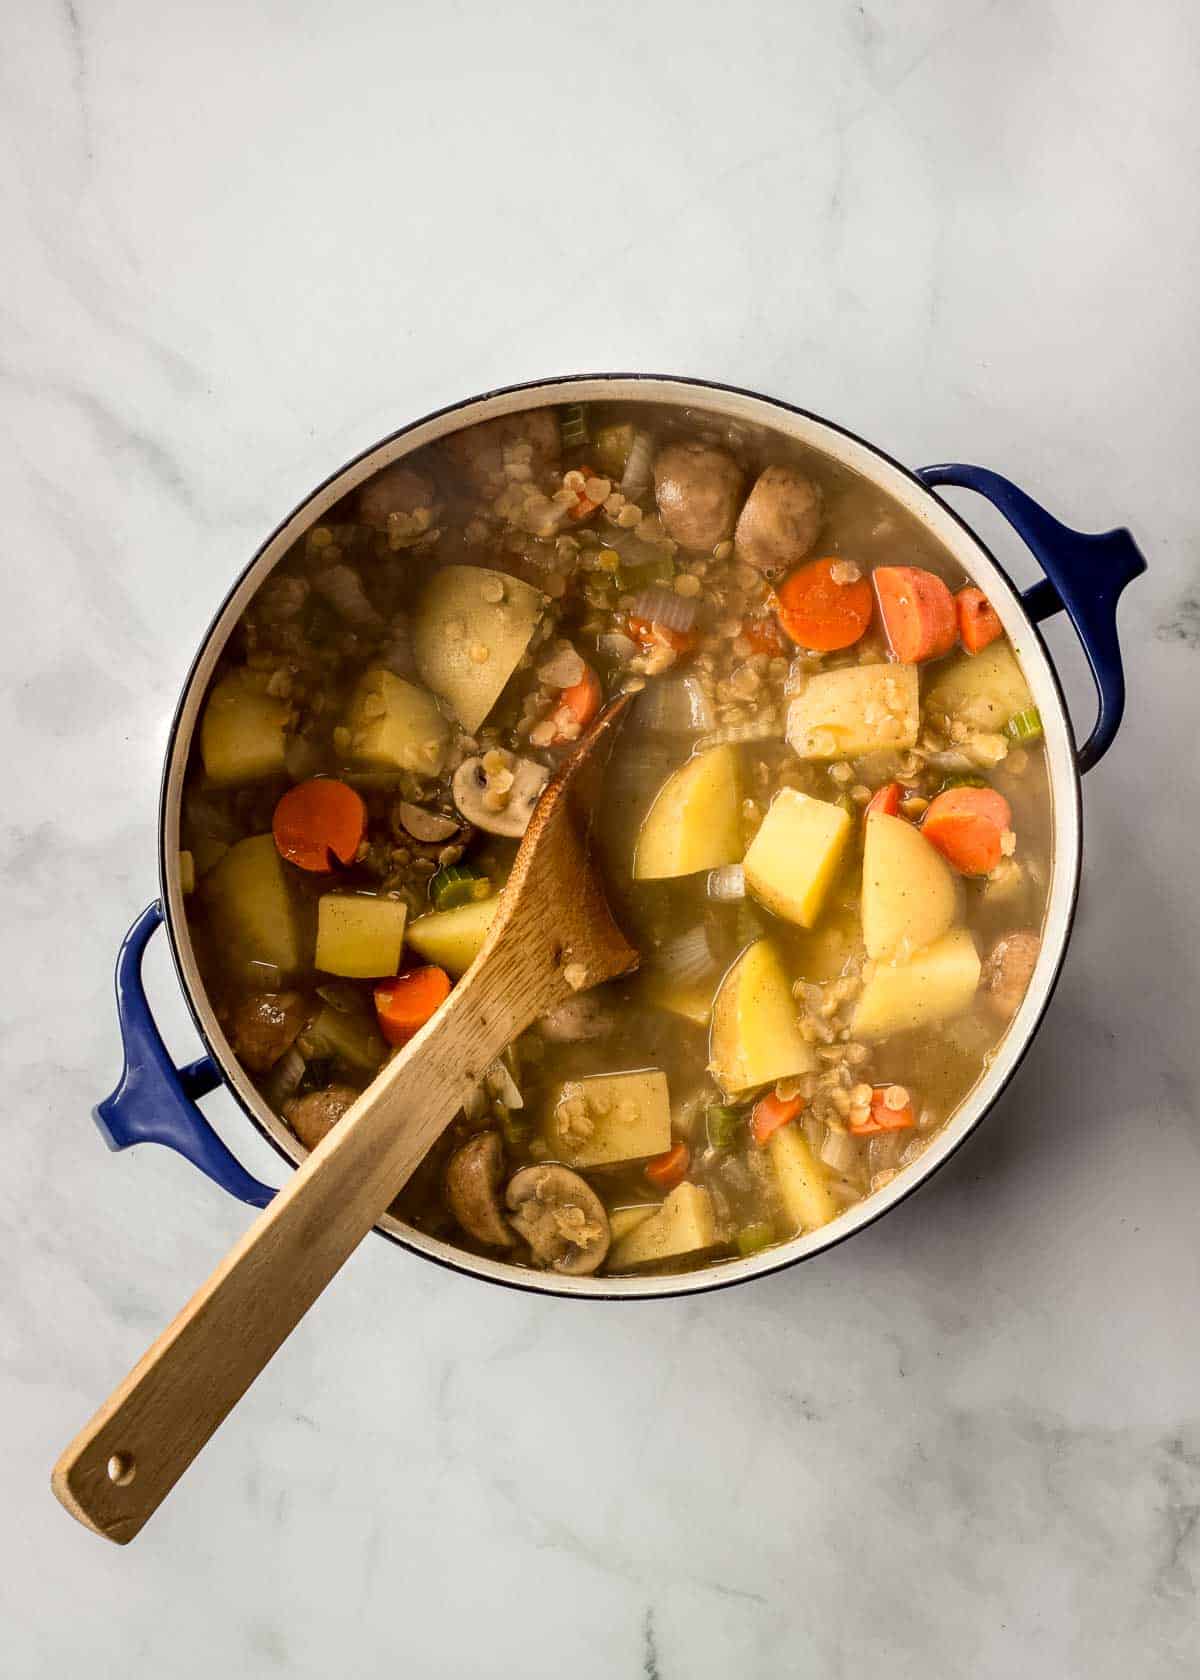 Large pot of simple vegetable stew cooking. A wooden spoon is visible in the pot and potatoes and carrots don't look cooked yet.